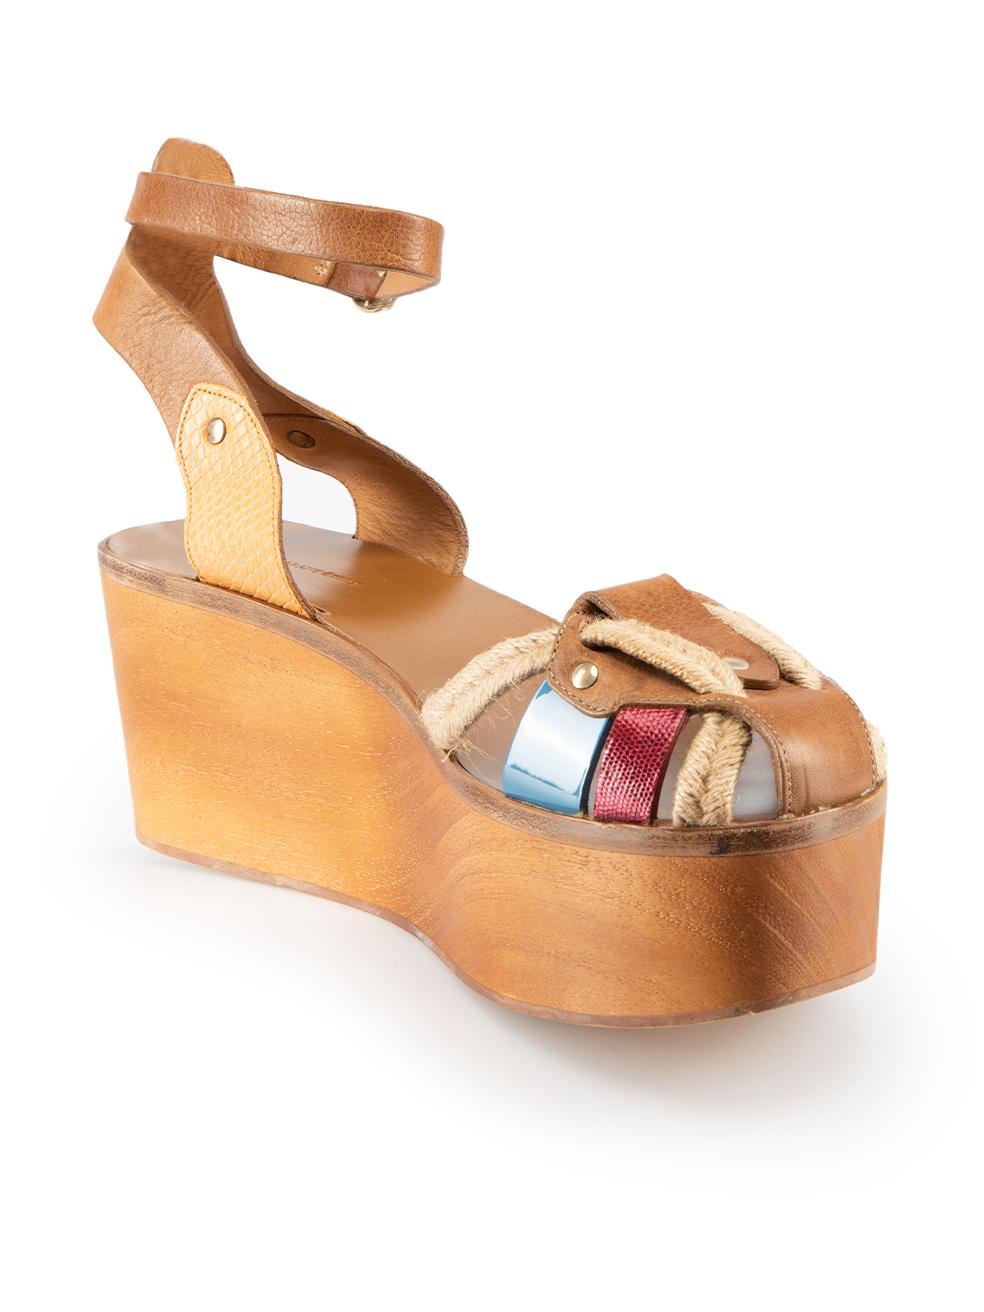 CONDITION is Very good. Minimal wear to sandals is evident. Minimal indentations to wooden platform on this used Isabel Marant √âtoile designer resale item. These shoes come with original box and dust bag.
 
Details
Brown
Leather
Platform